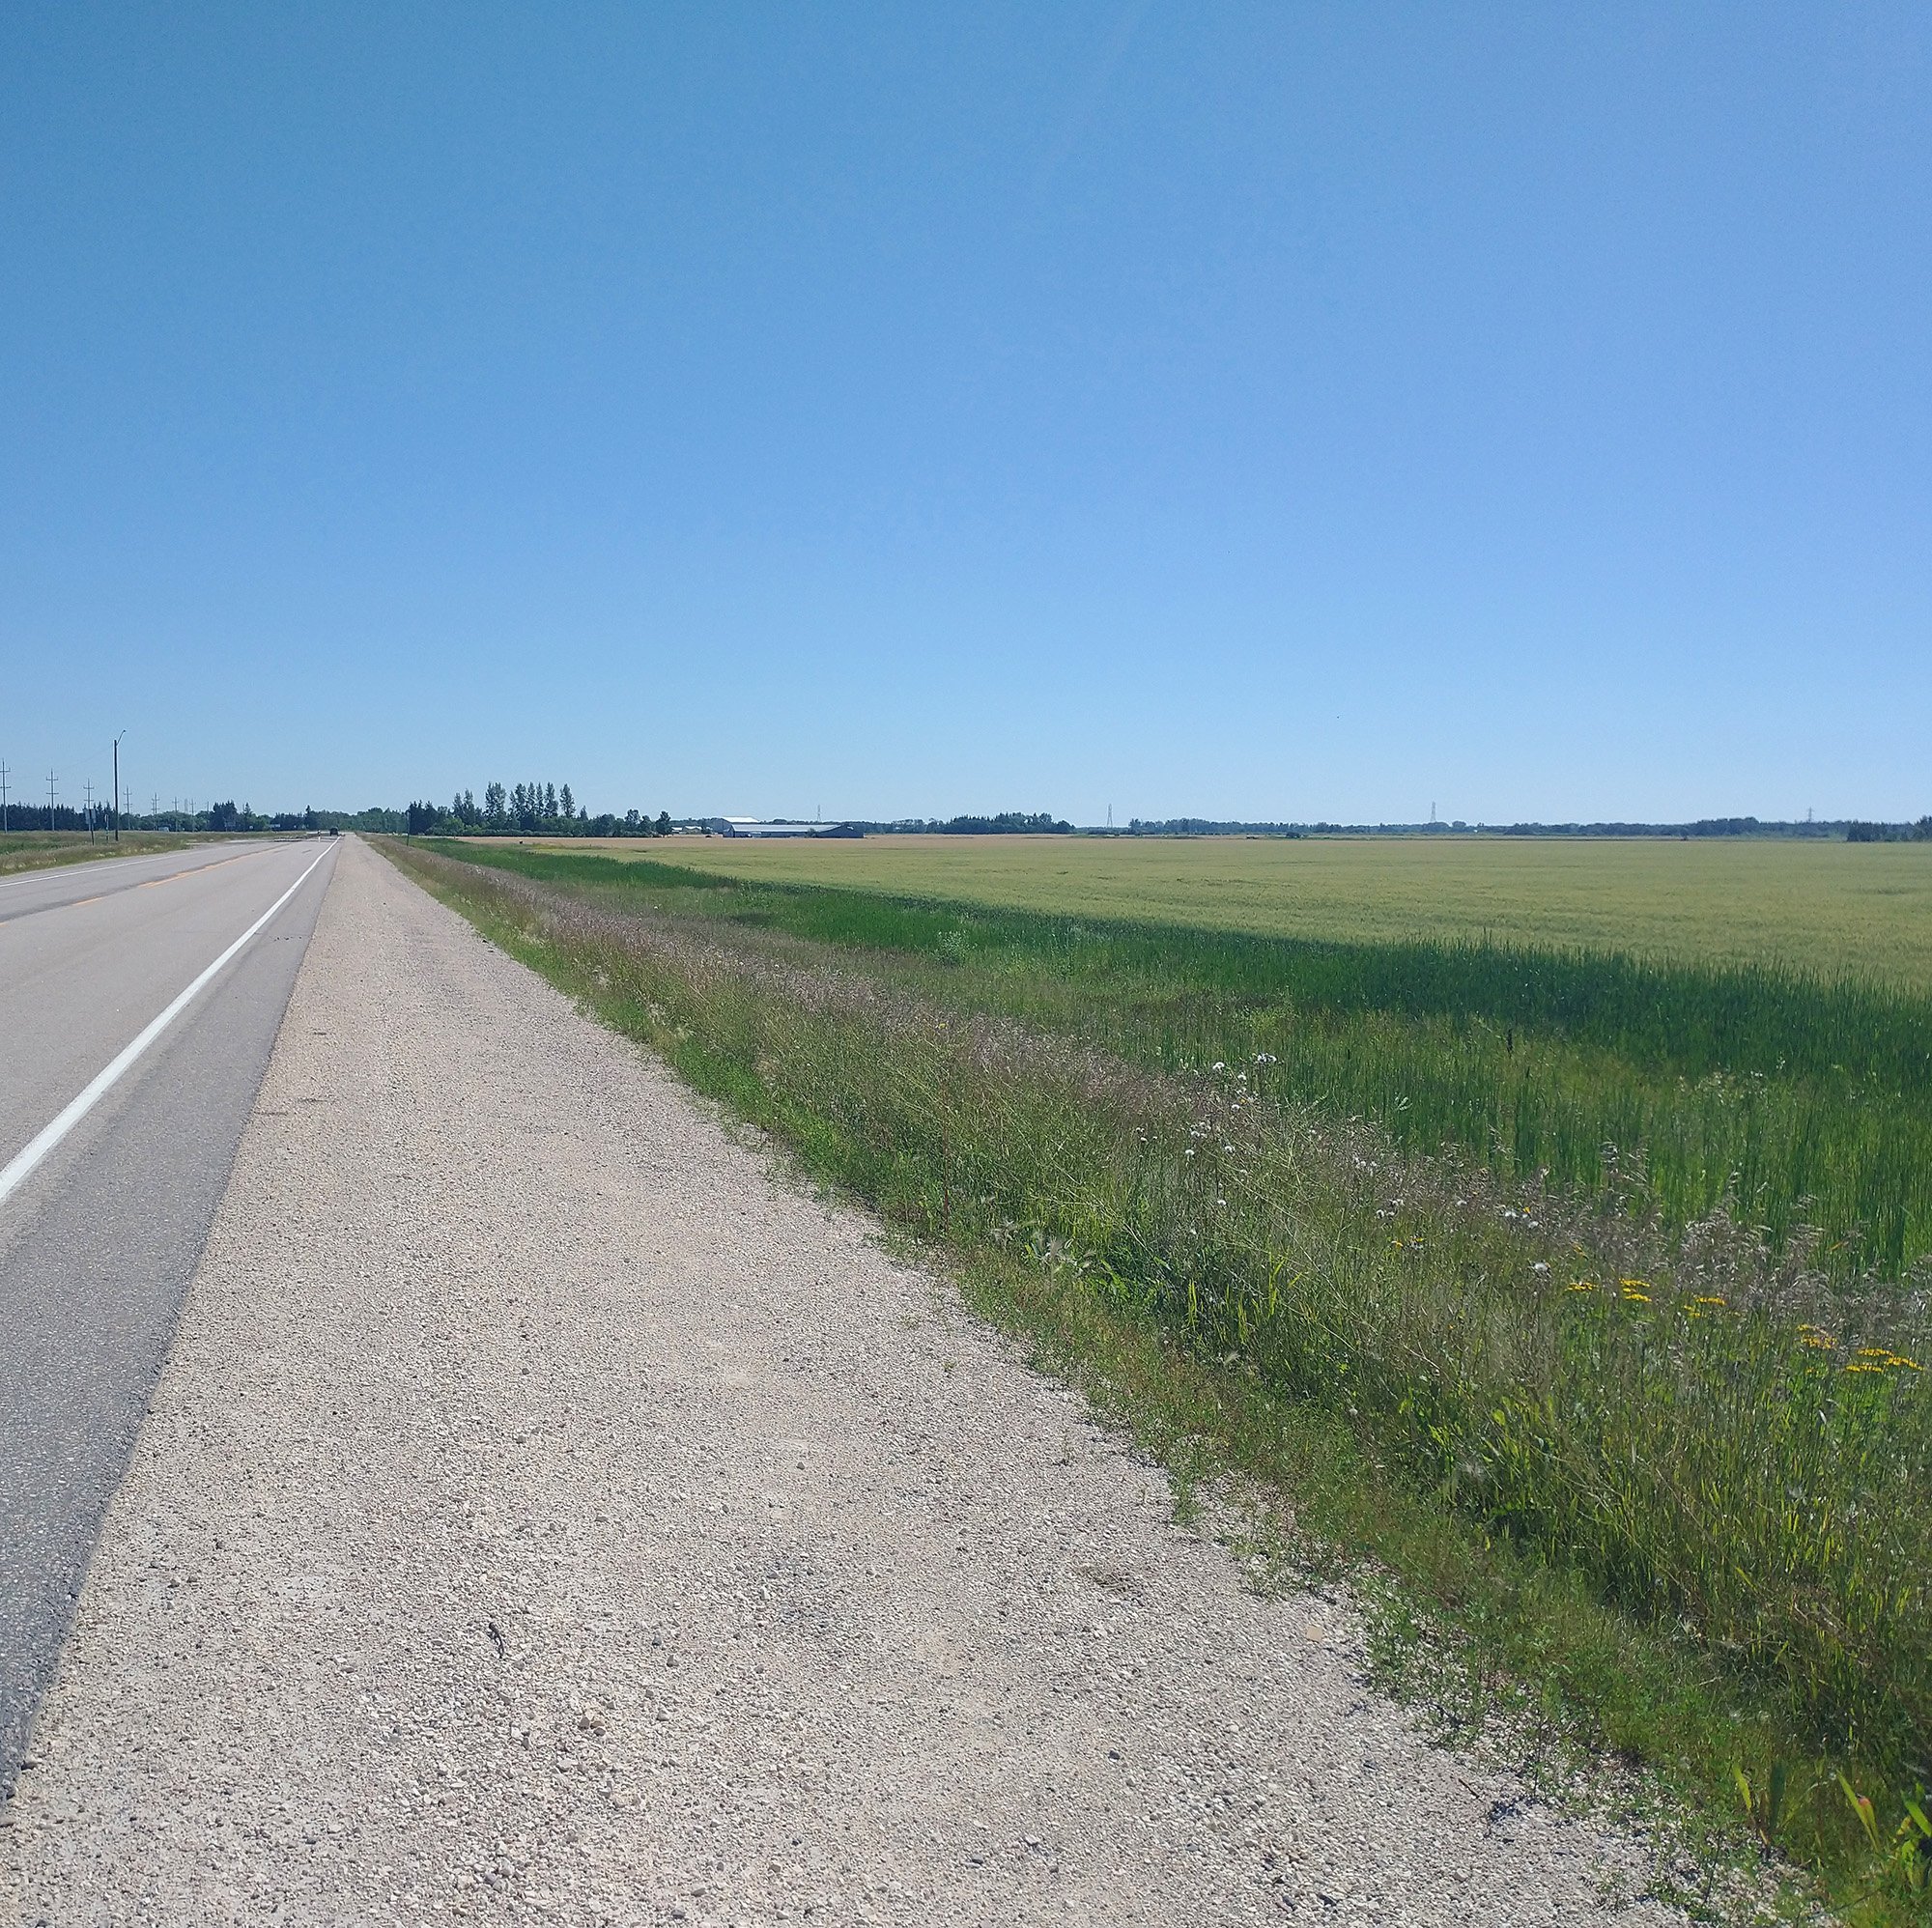 Outside the park you get the rural Manitoba look, which consists of endless flat green fields.